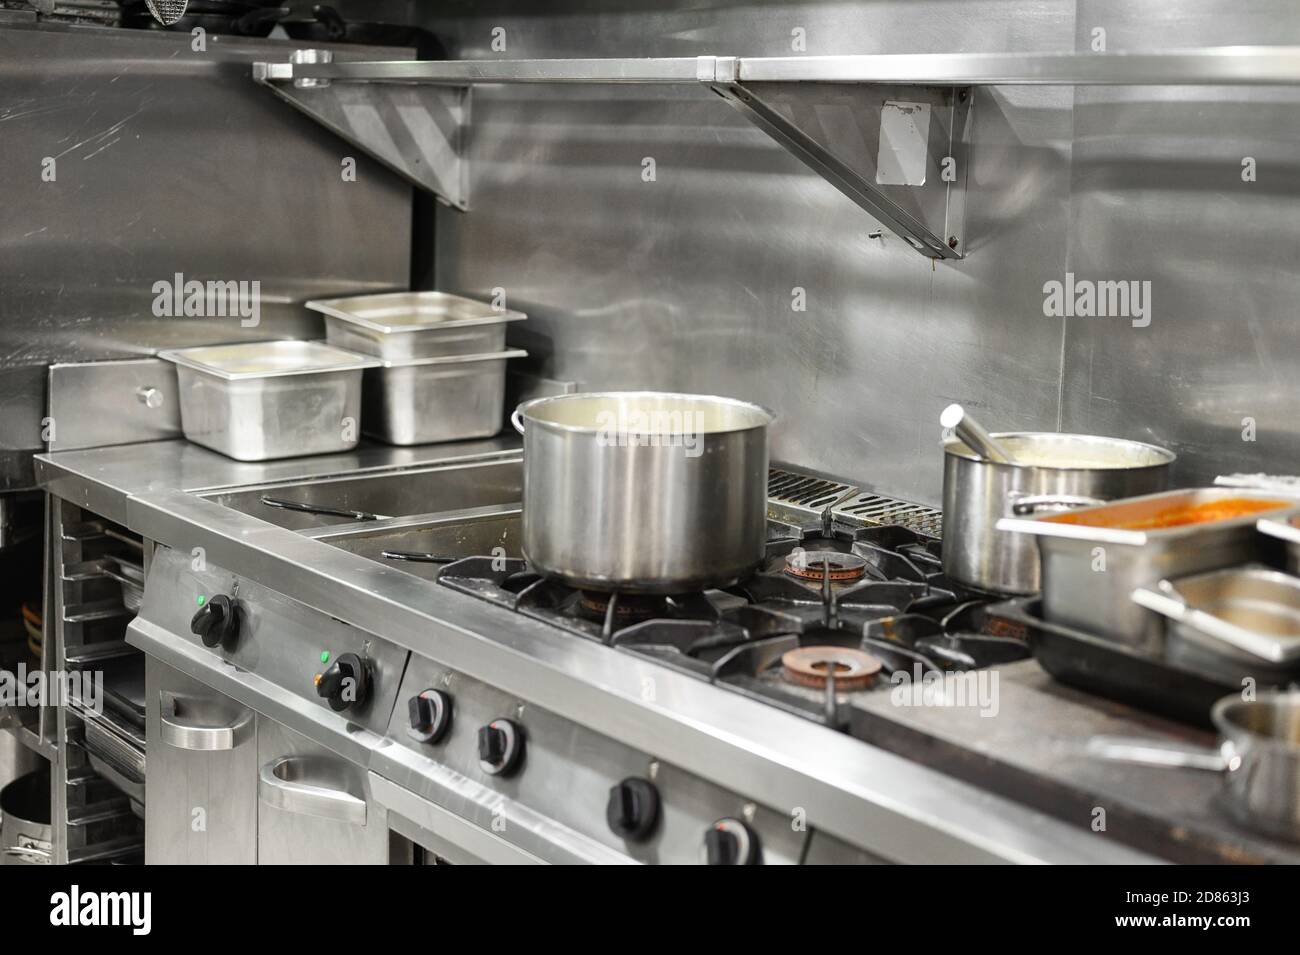 https://c8.alamy.com/comp/2D863J3/stainless-steel-restaurant-professional-kitchen-equipment-and-work-surface-high-quality-photo-2D863J3.jpg